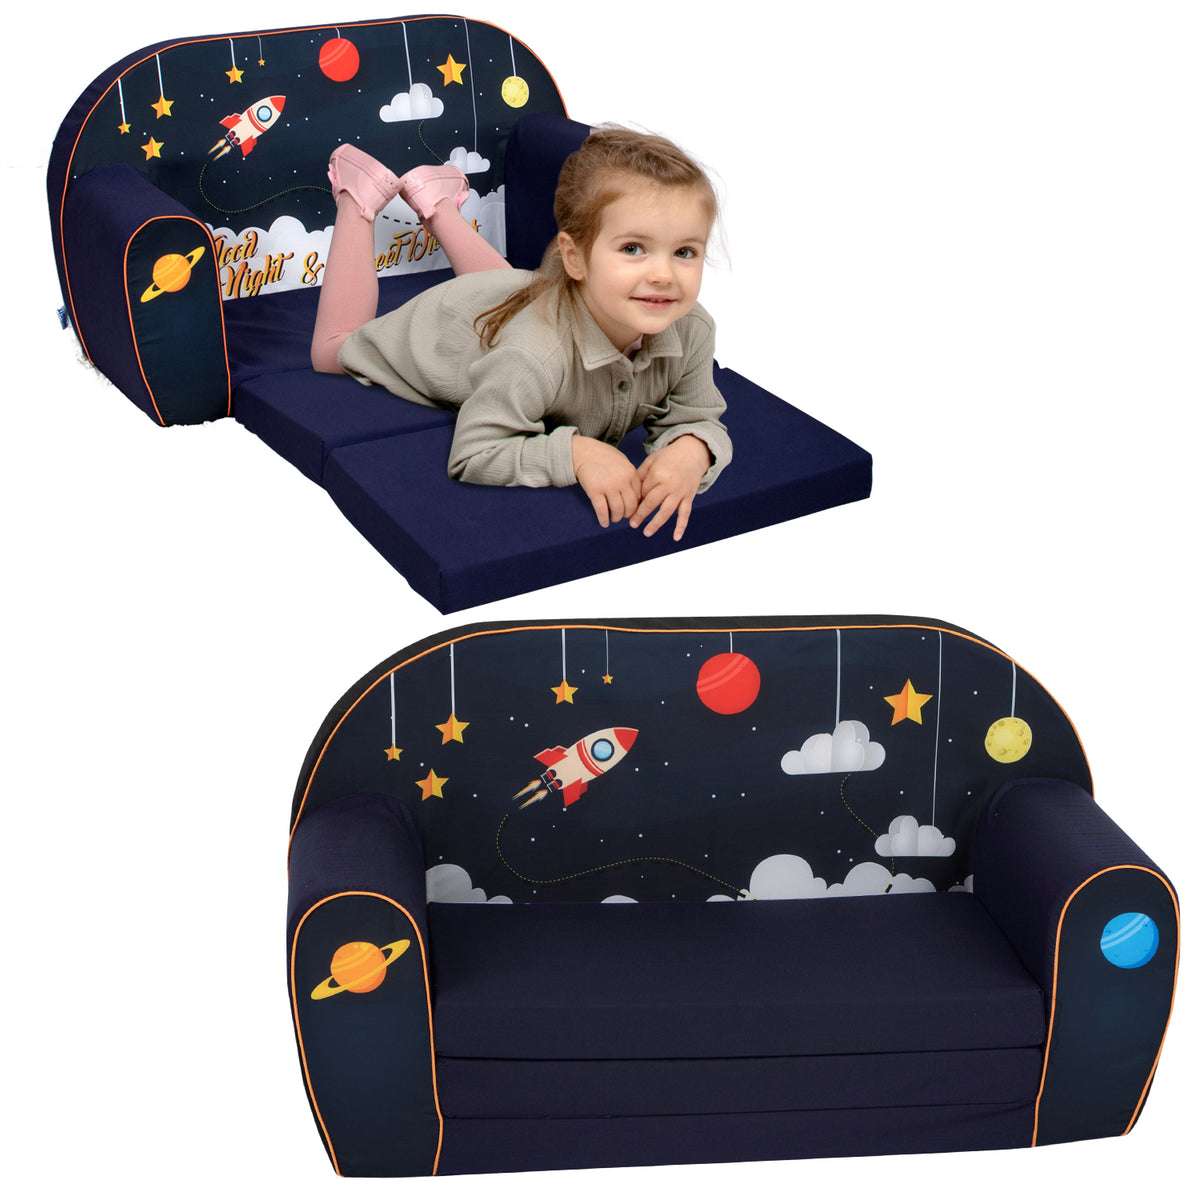 DELSIT Toddler Couch & Kids Sofa - Flip Open Double Sofa - Cosmos